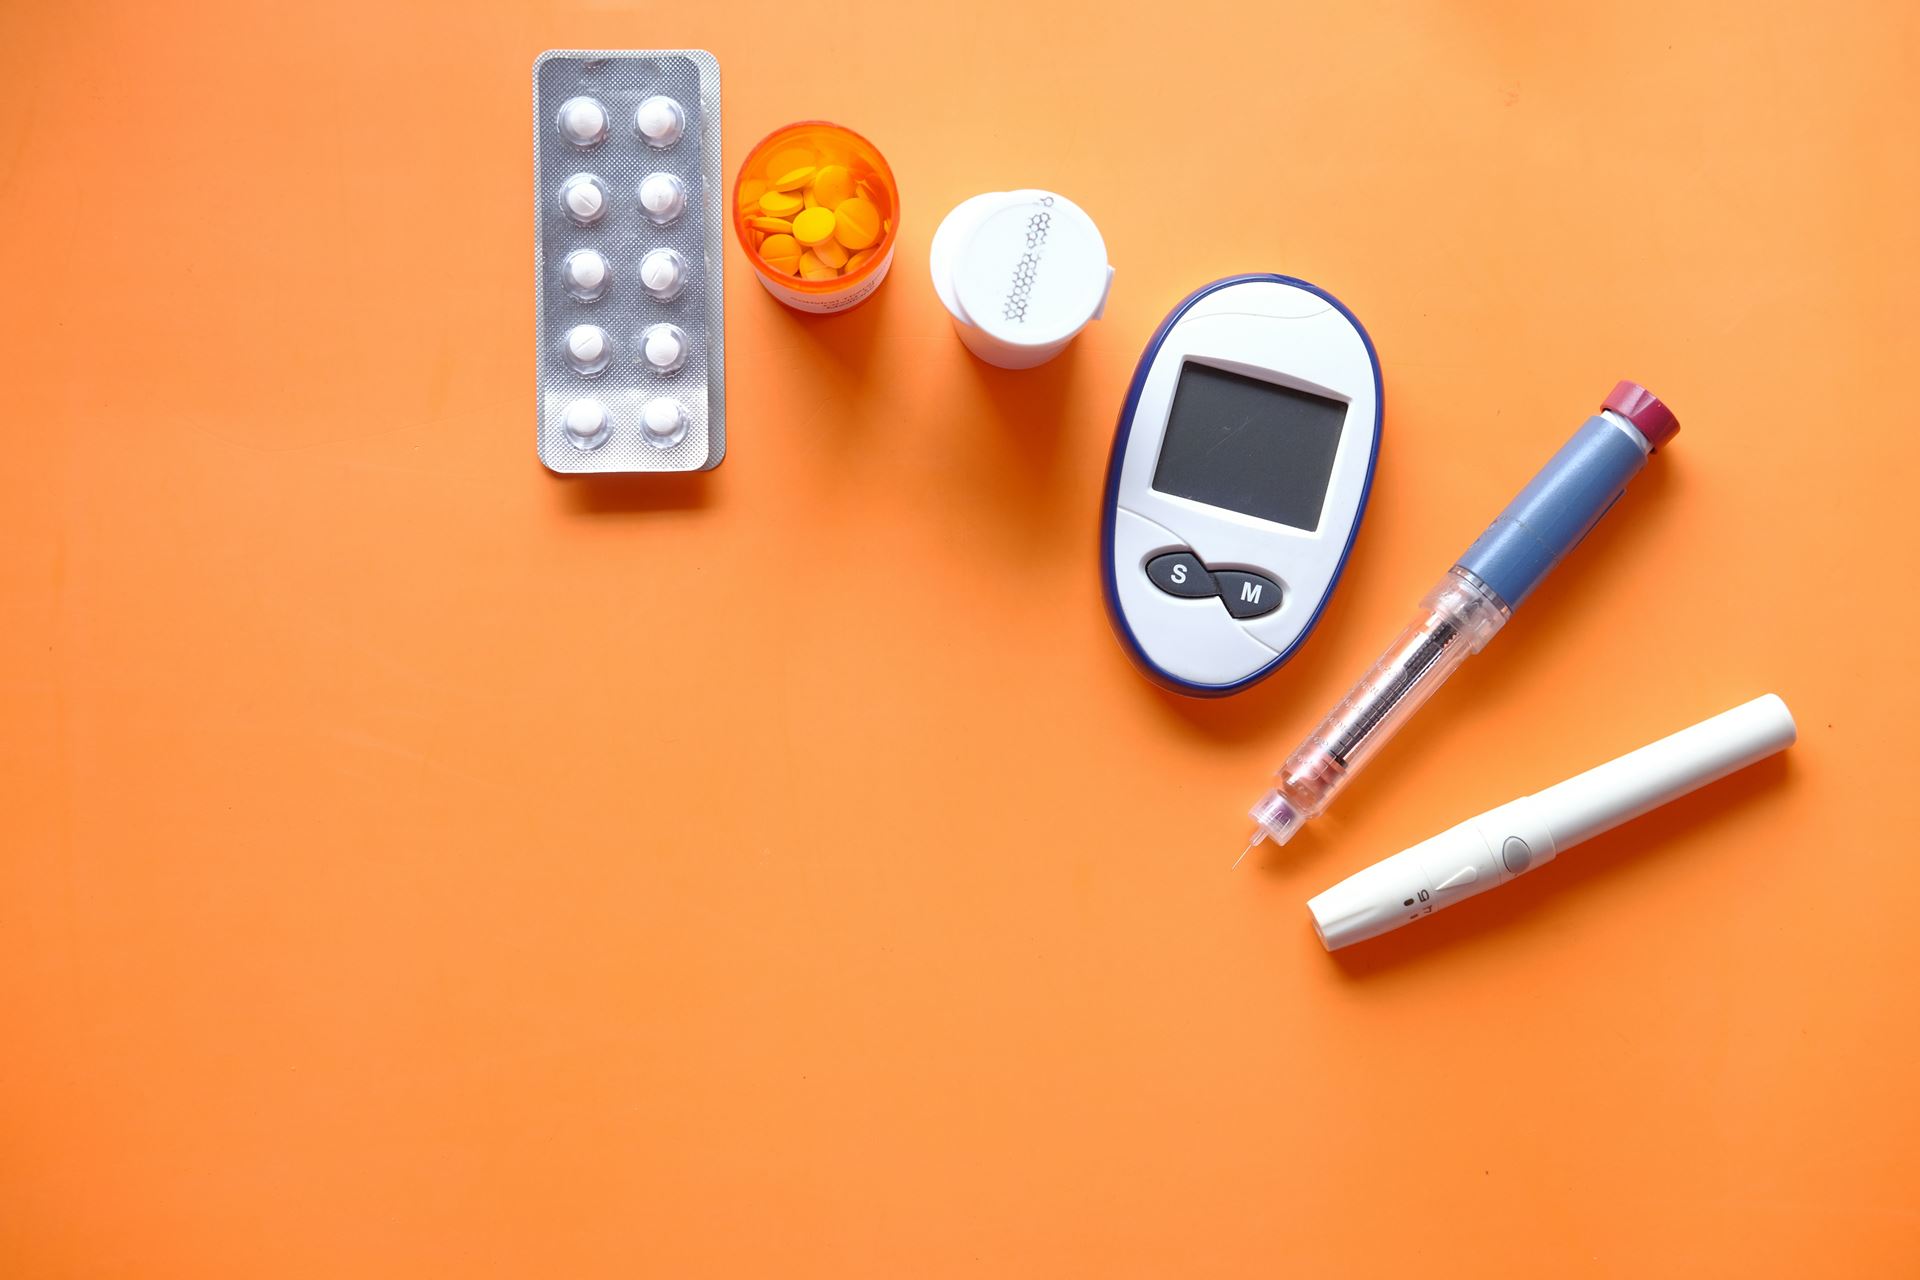 A selection of equipment used by people with diabetes, including a blood sugar monitor, an insulin injector pen and some tablets